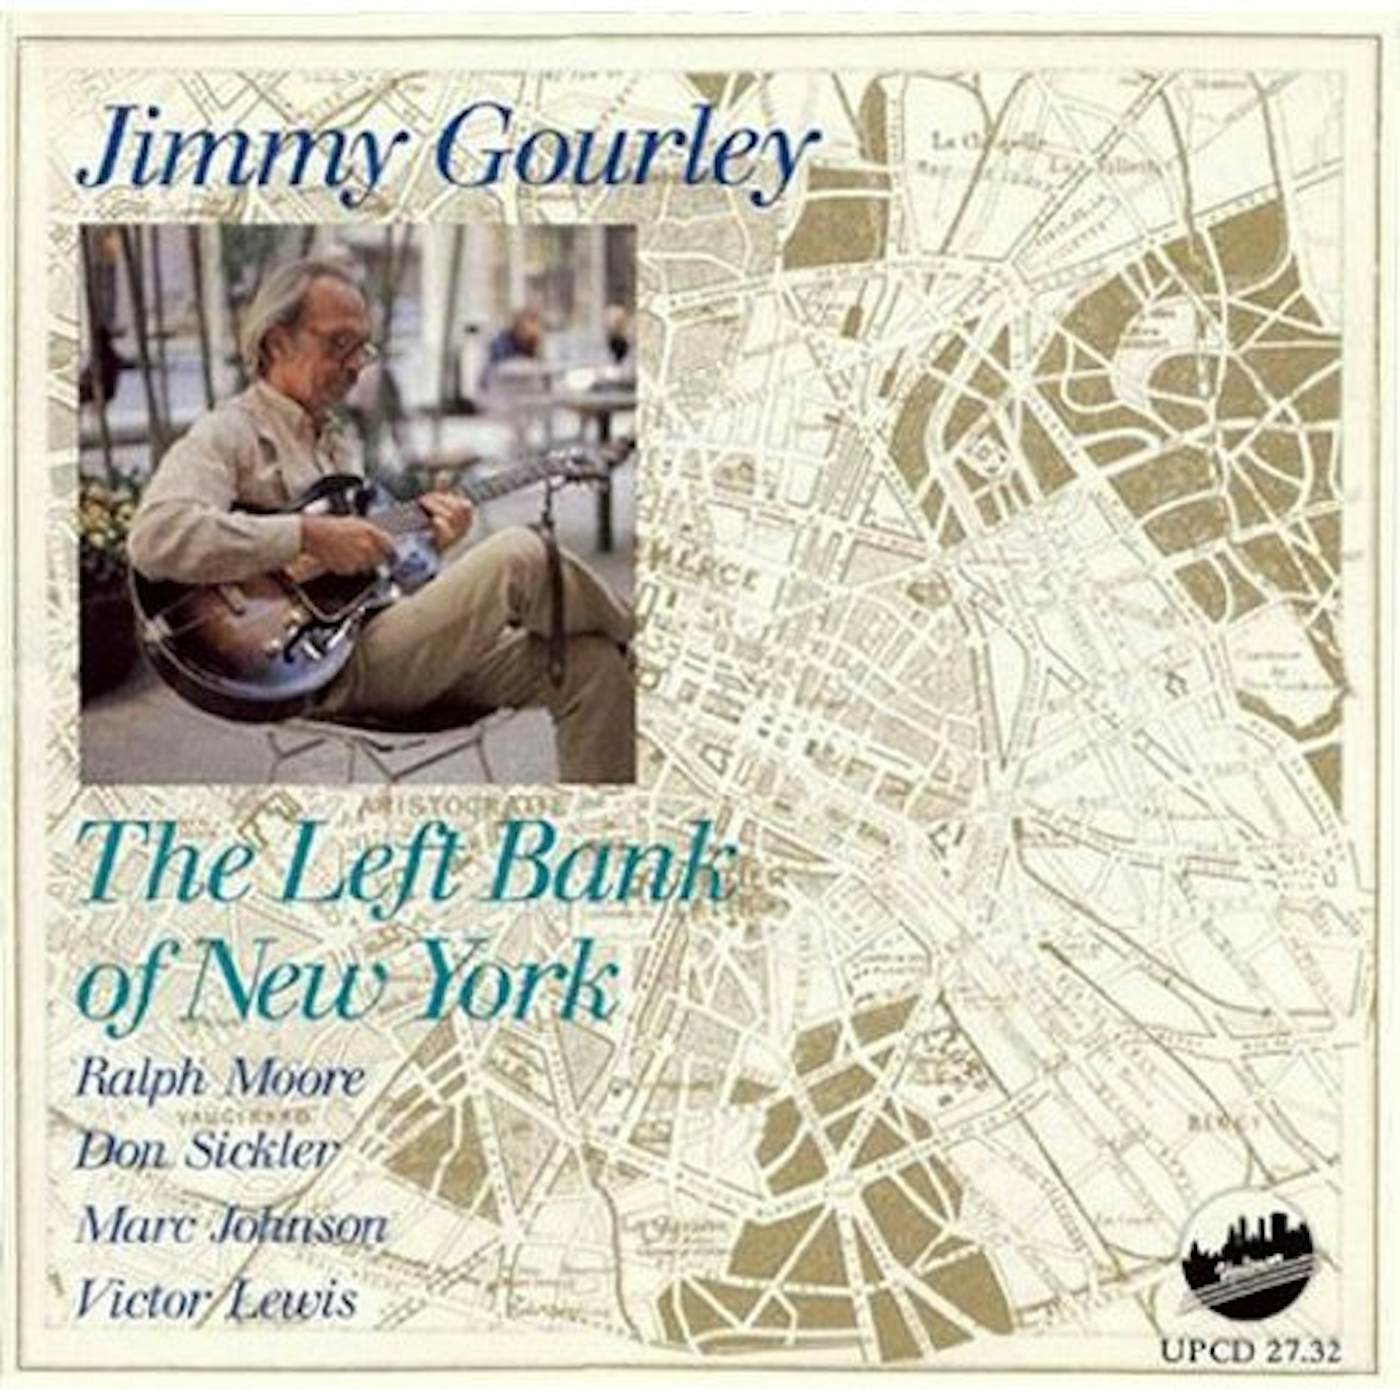 Jimmy Gourley LEFT BANK OF NEW YORK CD